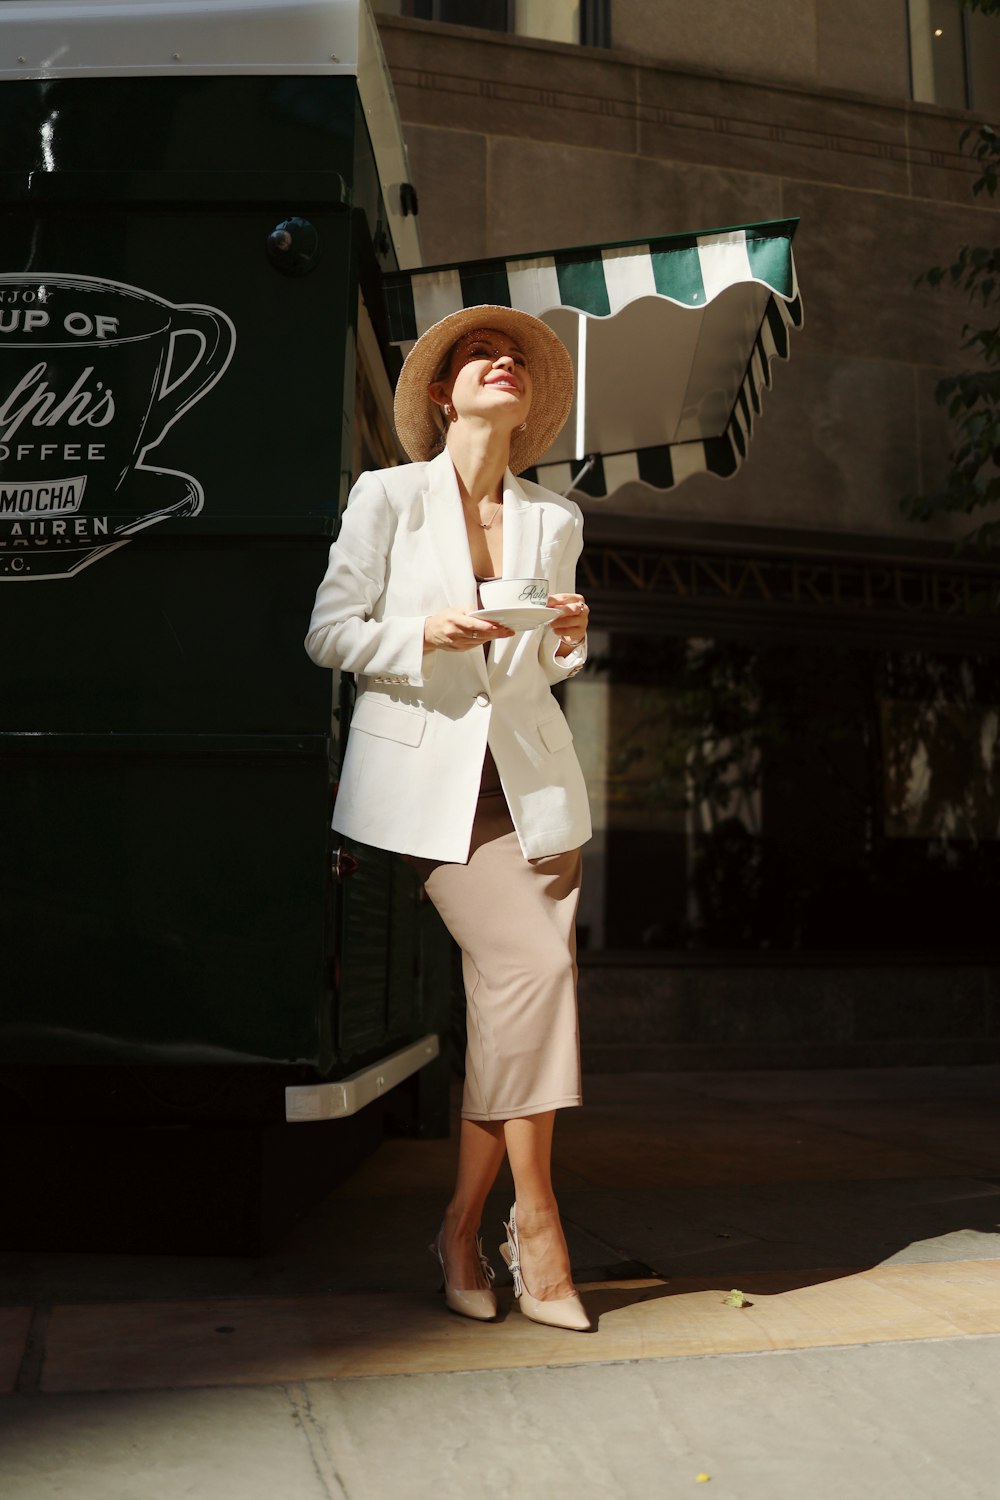 a woman in a white suit and hat standing in front of a coffee truck